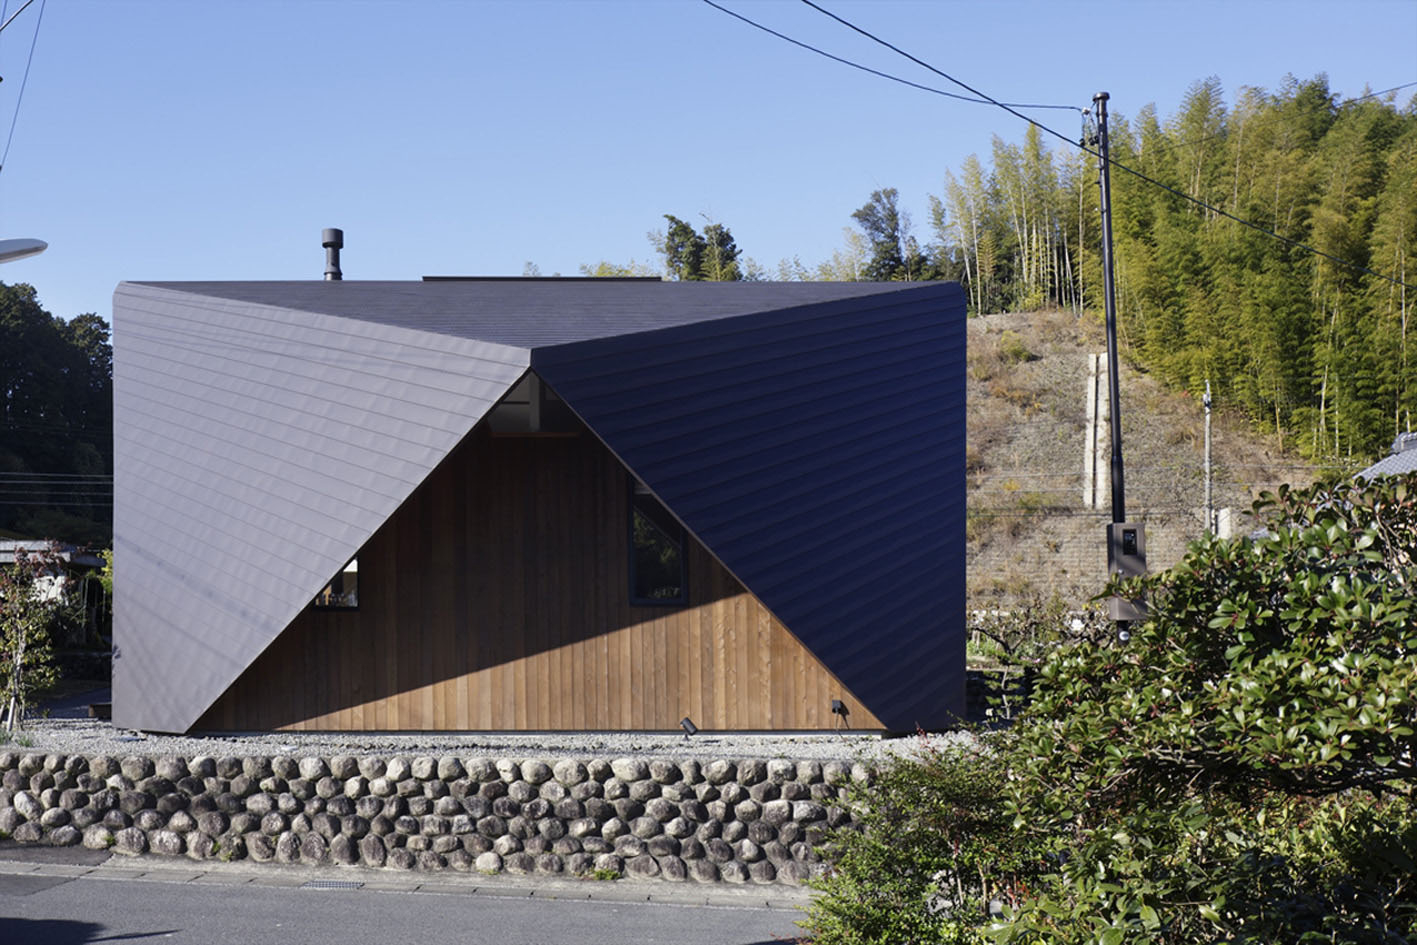 Origami Architecture Design Fascinating Origami House With Architectural Comfort Pockets